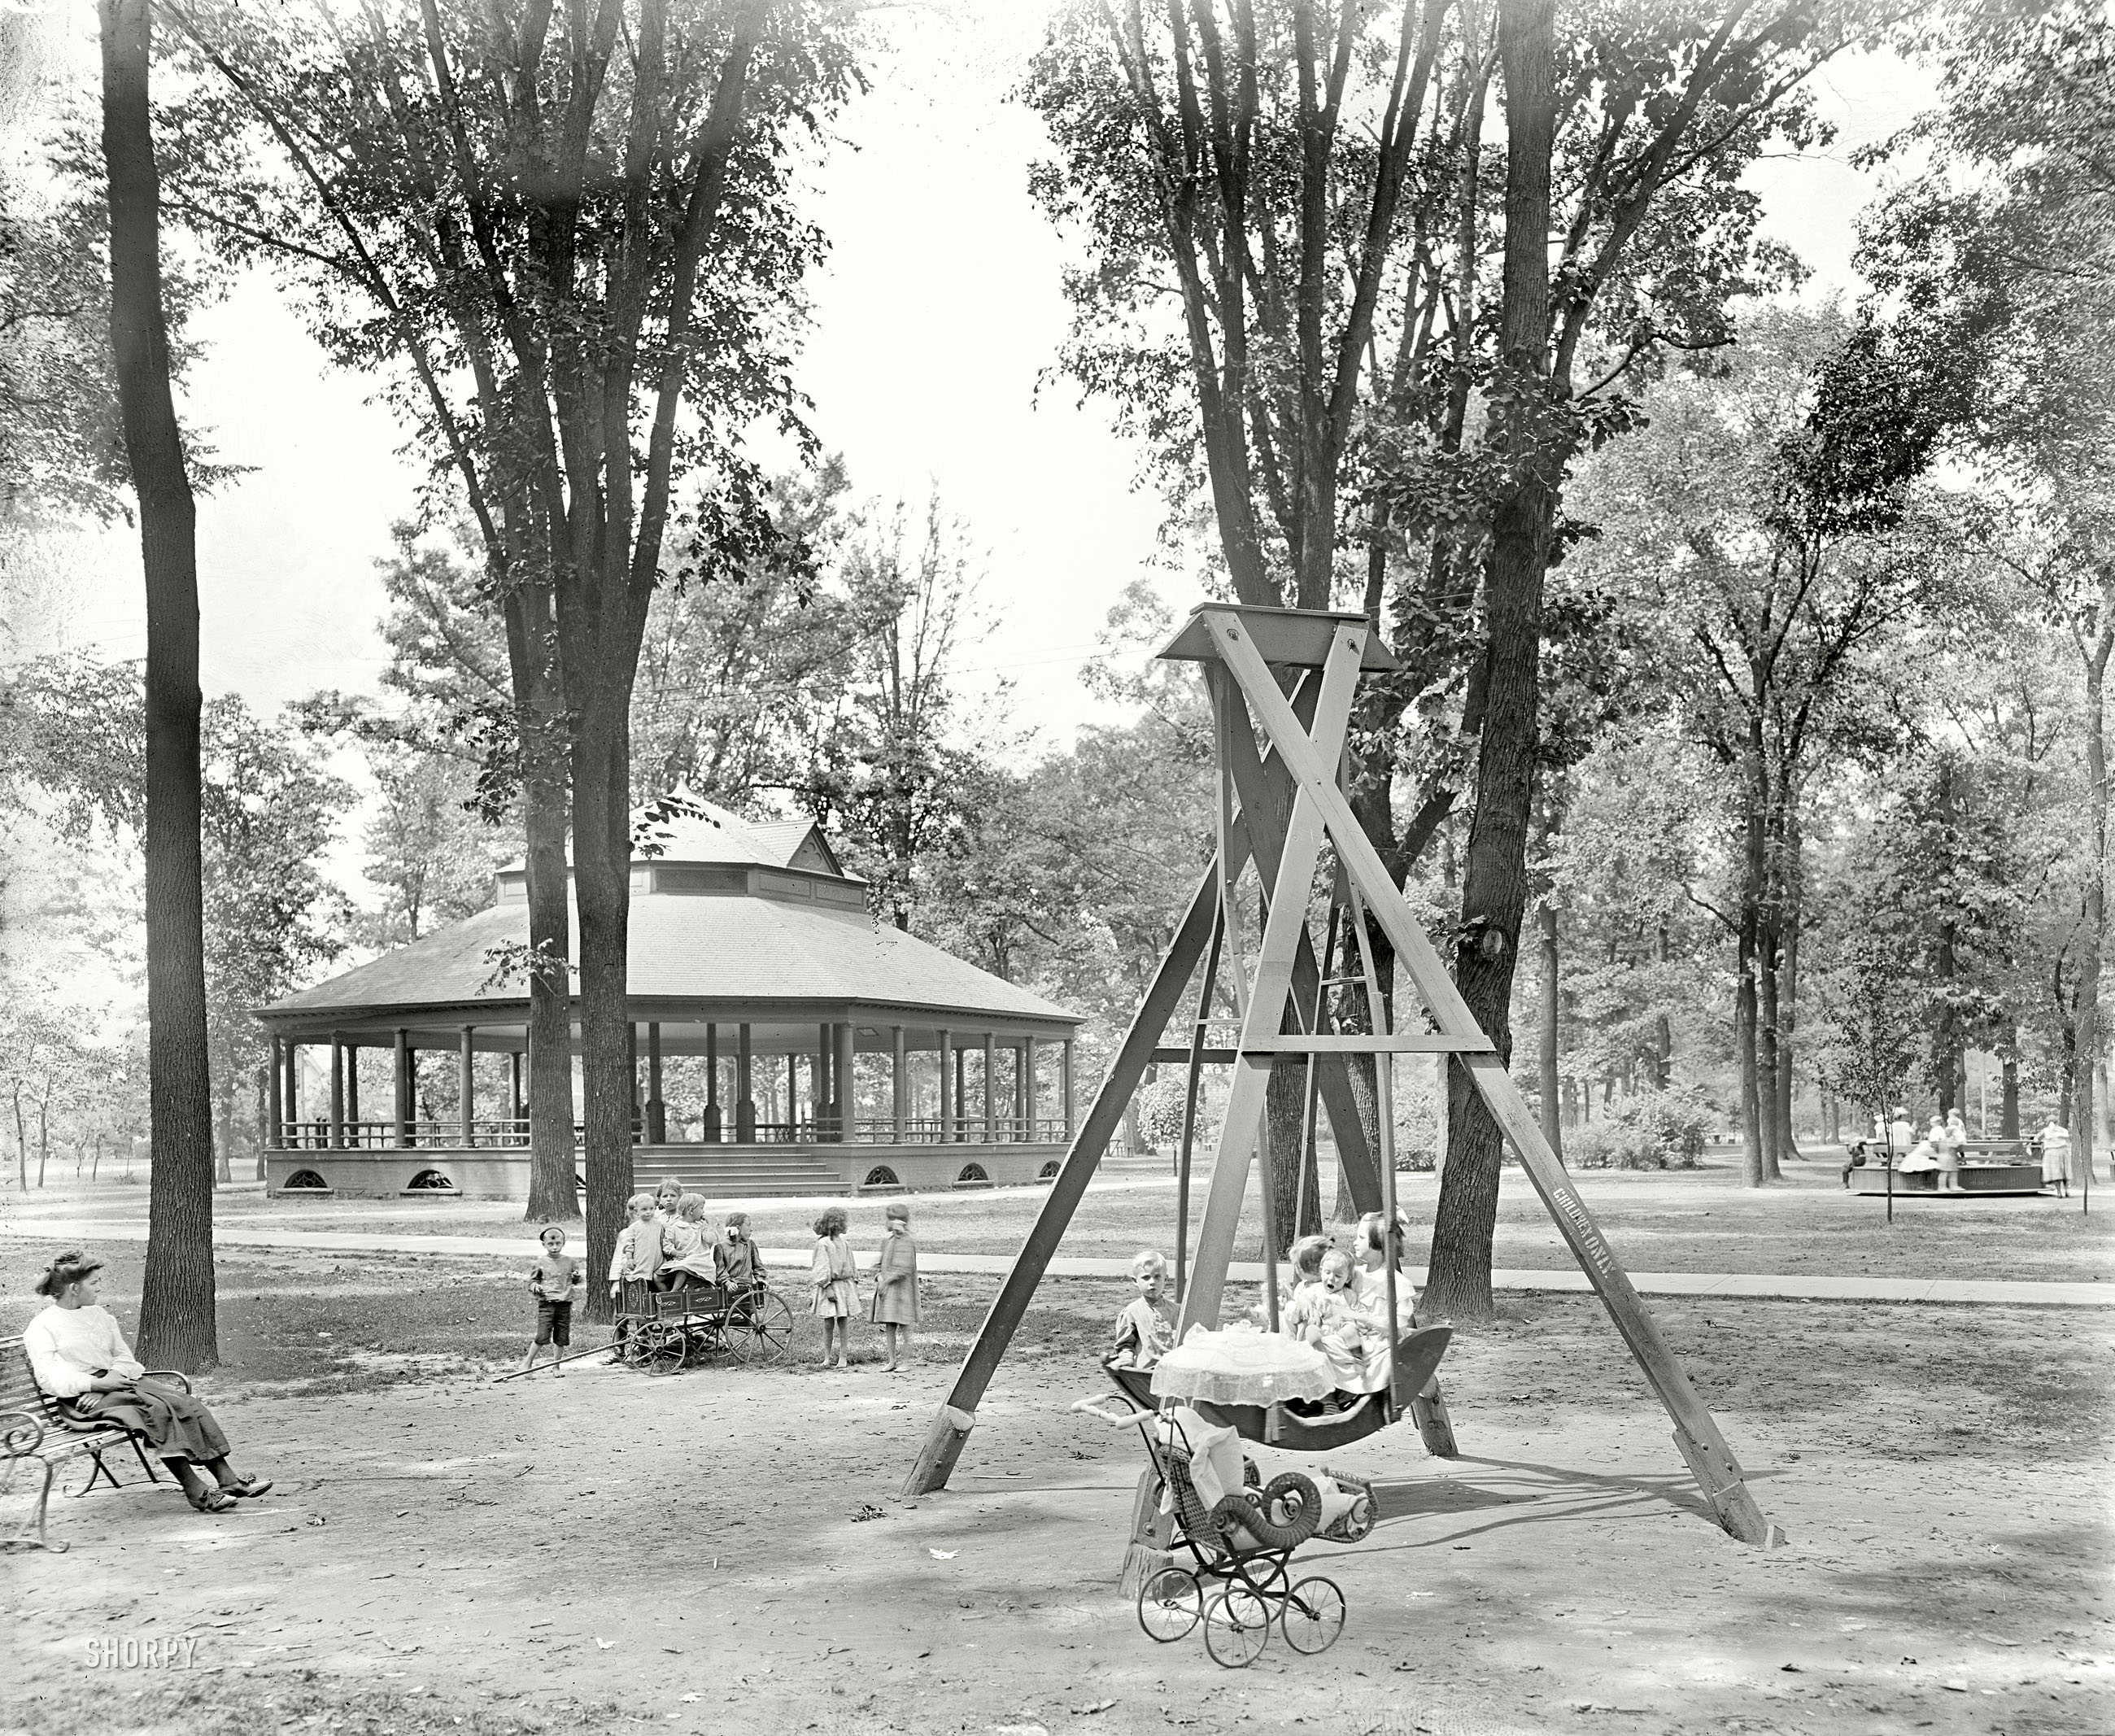 Detroit, Michigan, circa 1900. "Scene in Clark Park." In the background is merry-go-round we saw a few days ago. 8x10 glass negative. View full size.